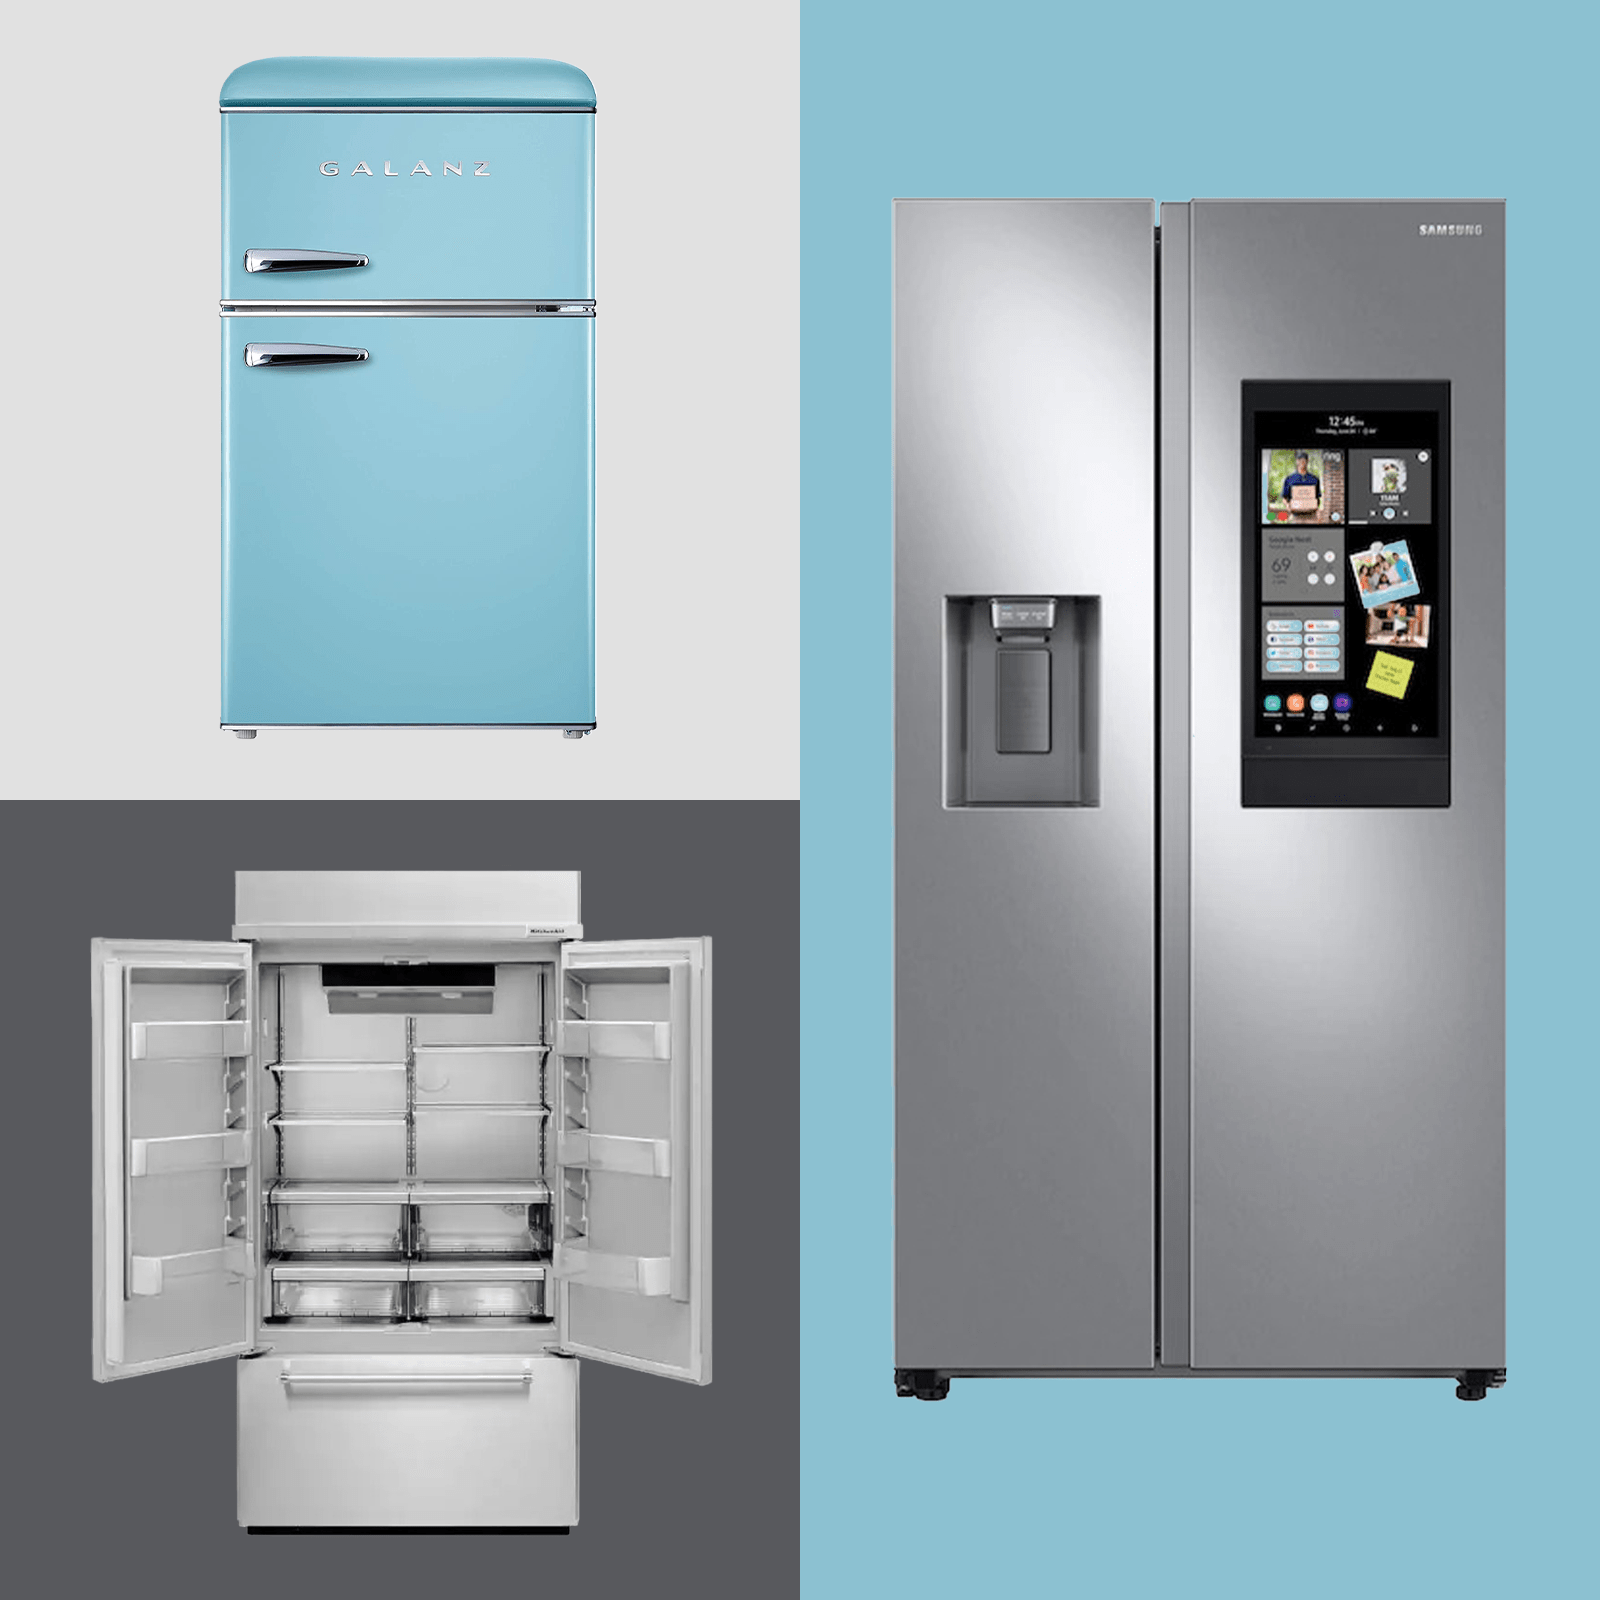 https://www.rd.com/wp-content/uploads/2022/08/the-best-refrigerators-you-can-buy-in-2022-ft-via-merchant.png?fit=700%2C700